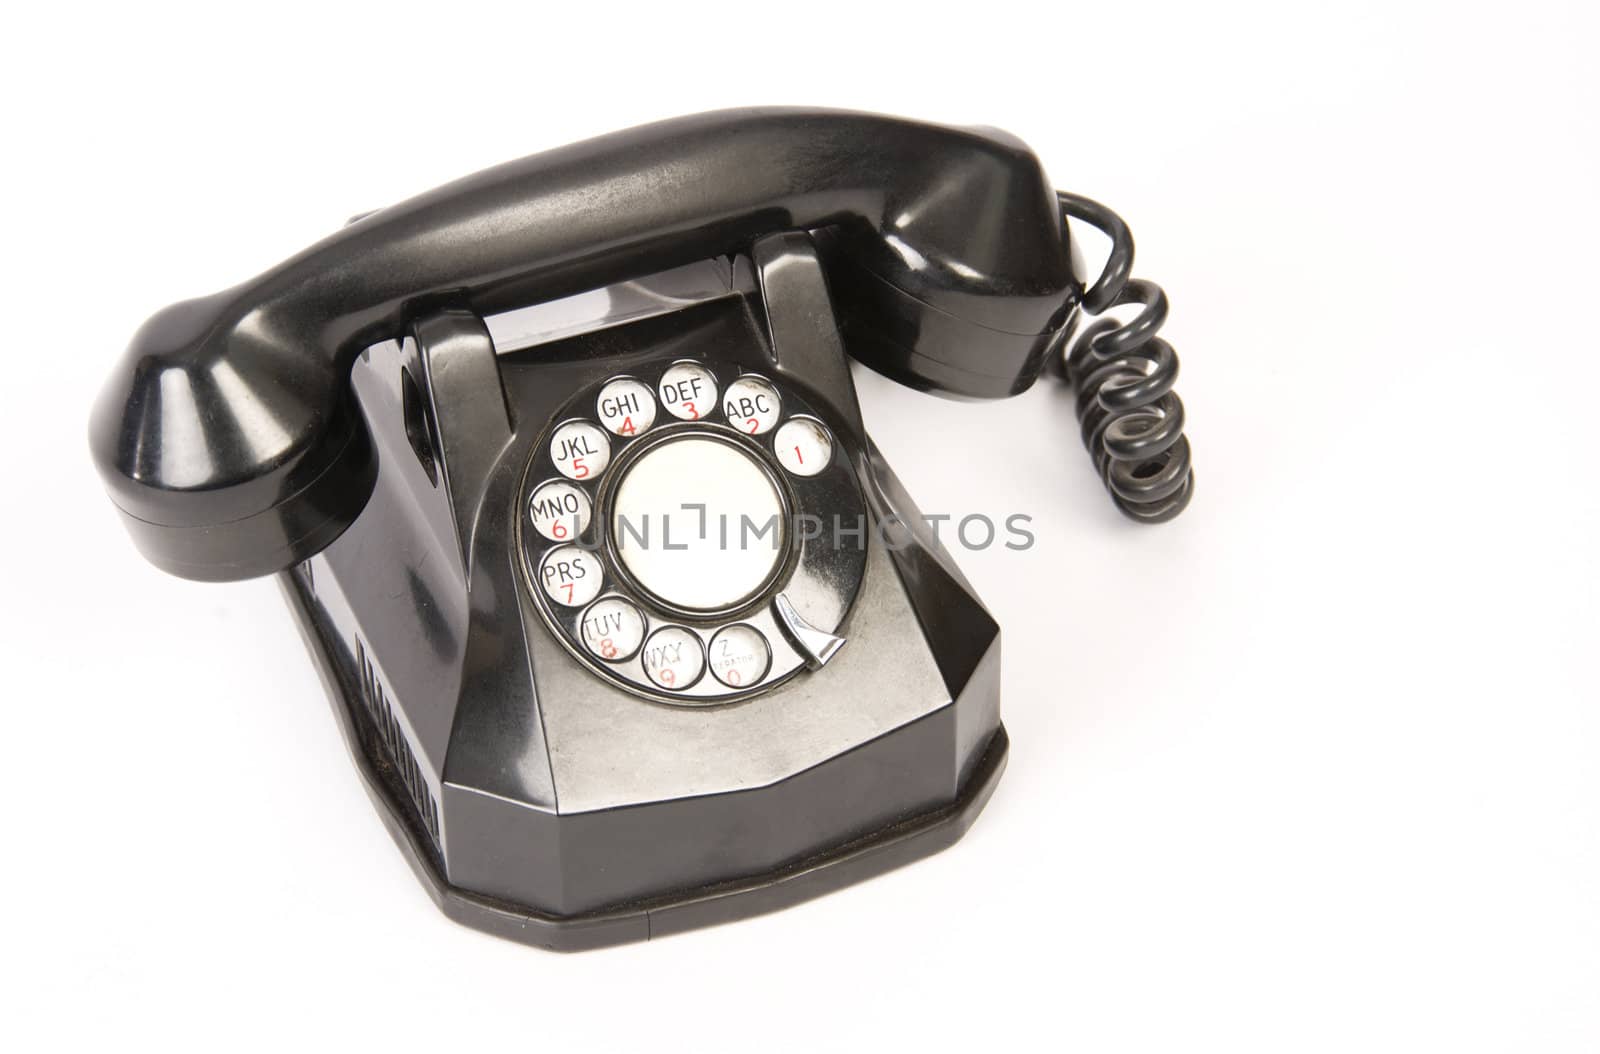 A Vintage Rotary Dial Telephone isolated on white